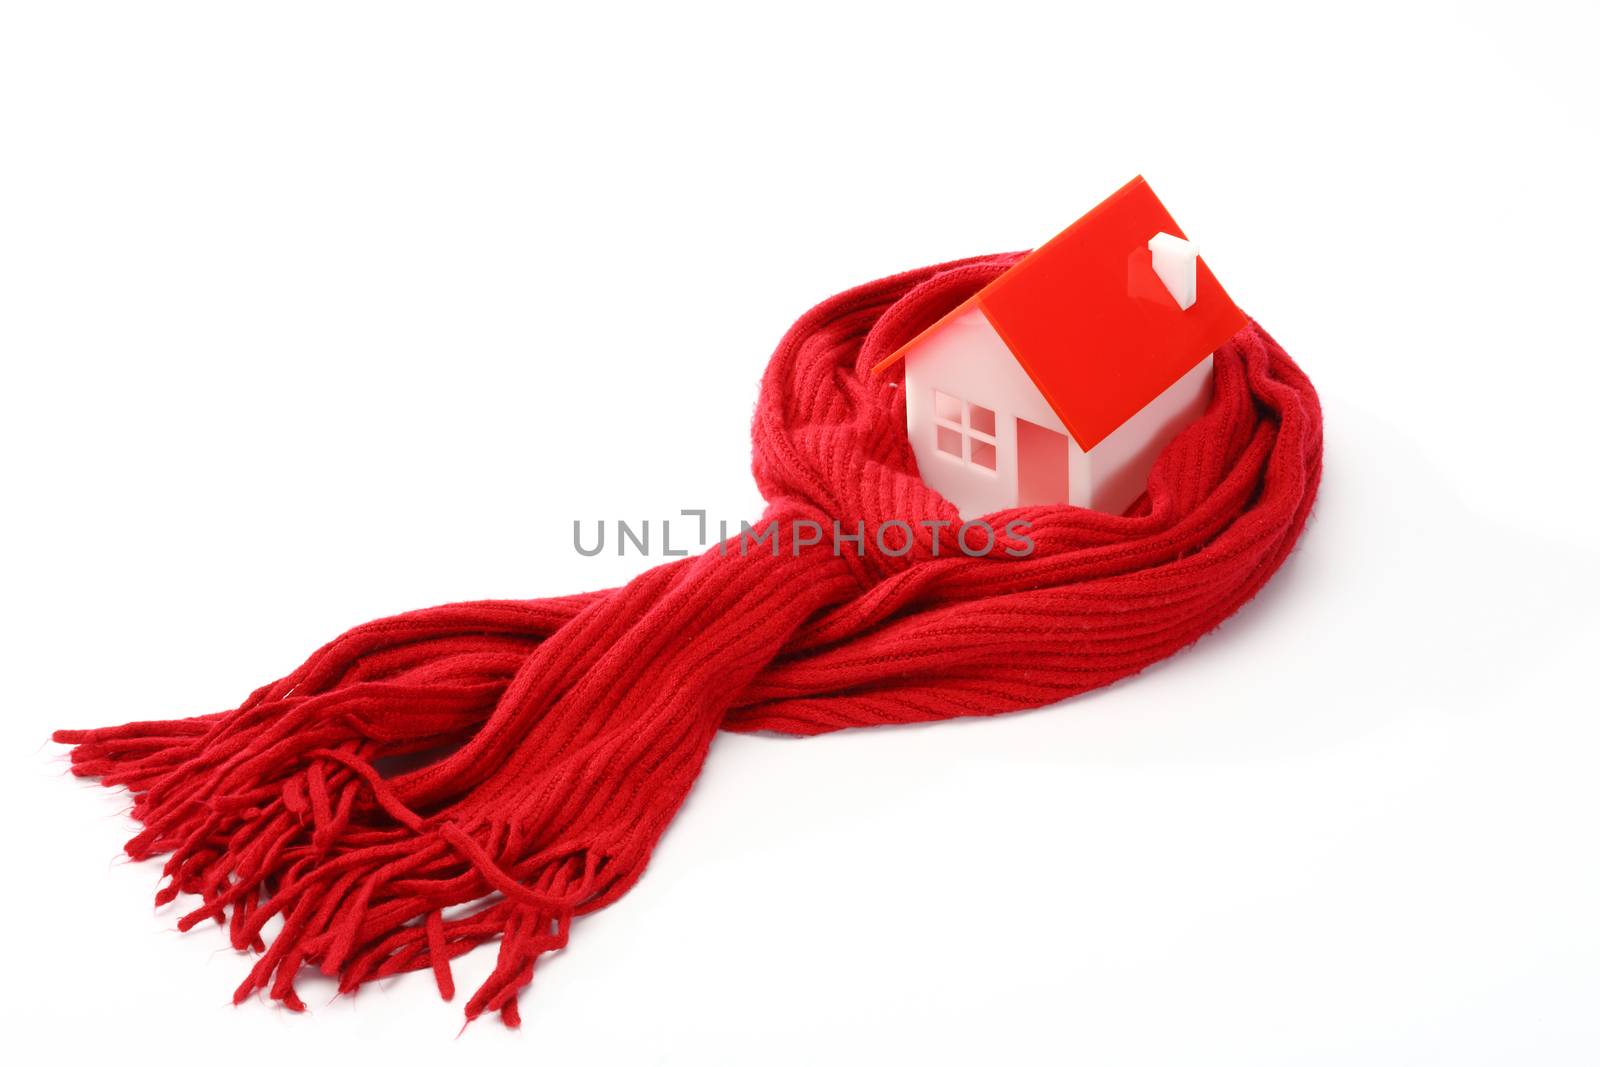 Model of house wrapped in red scarf over white